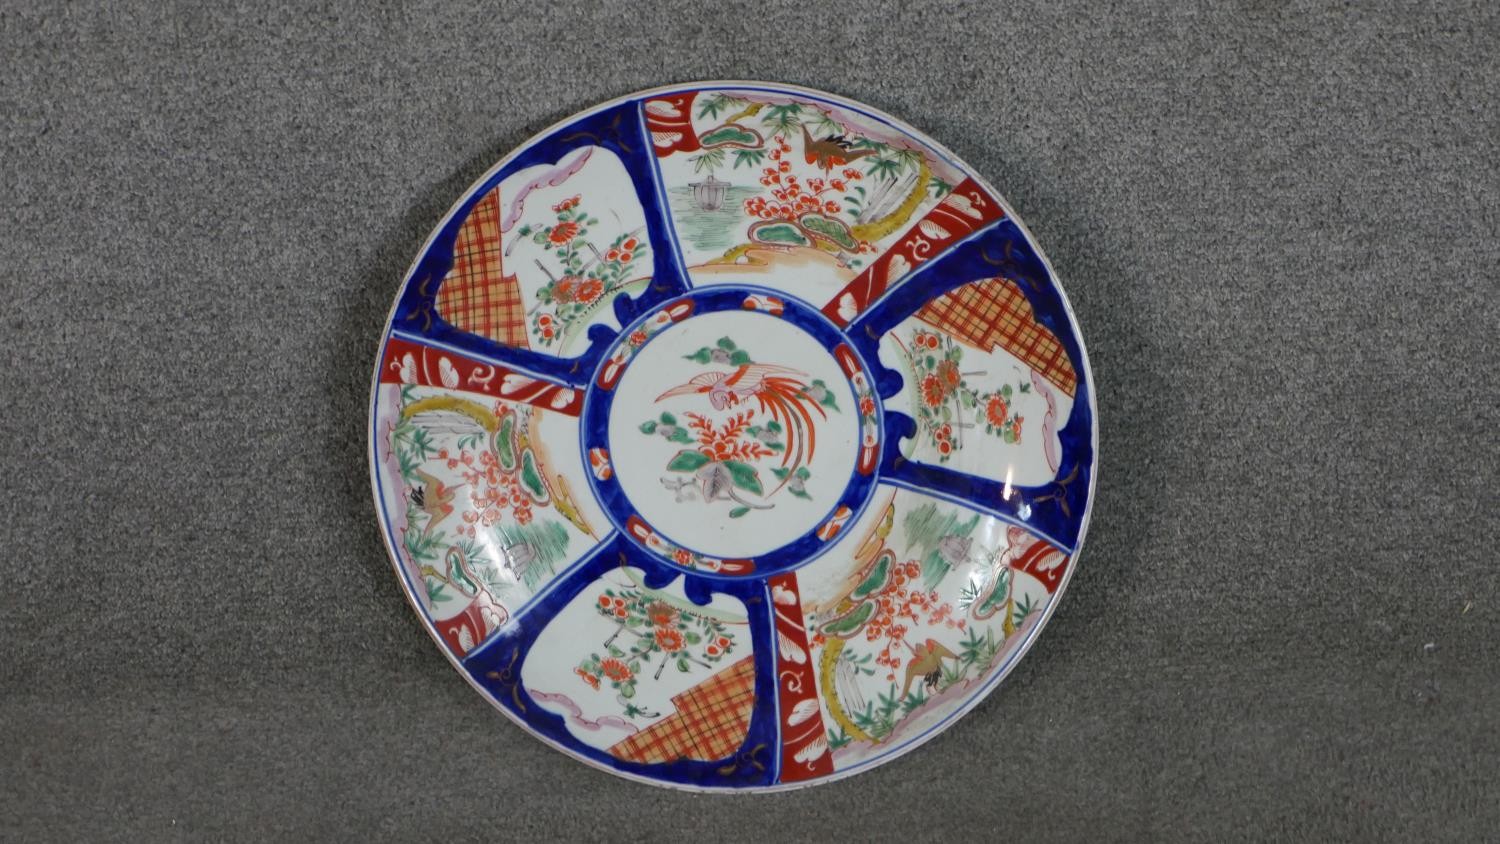 A large 19th century Japanese Imari charger with panels depicting flowers and birds on a dark blue